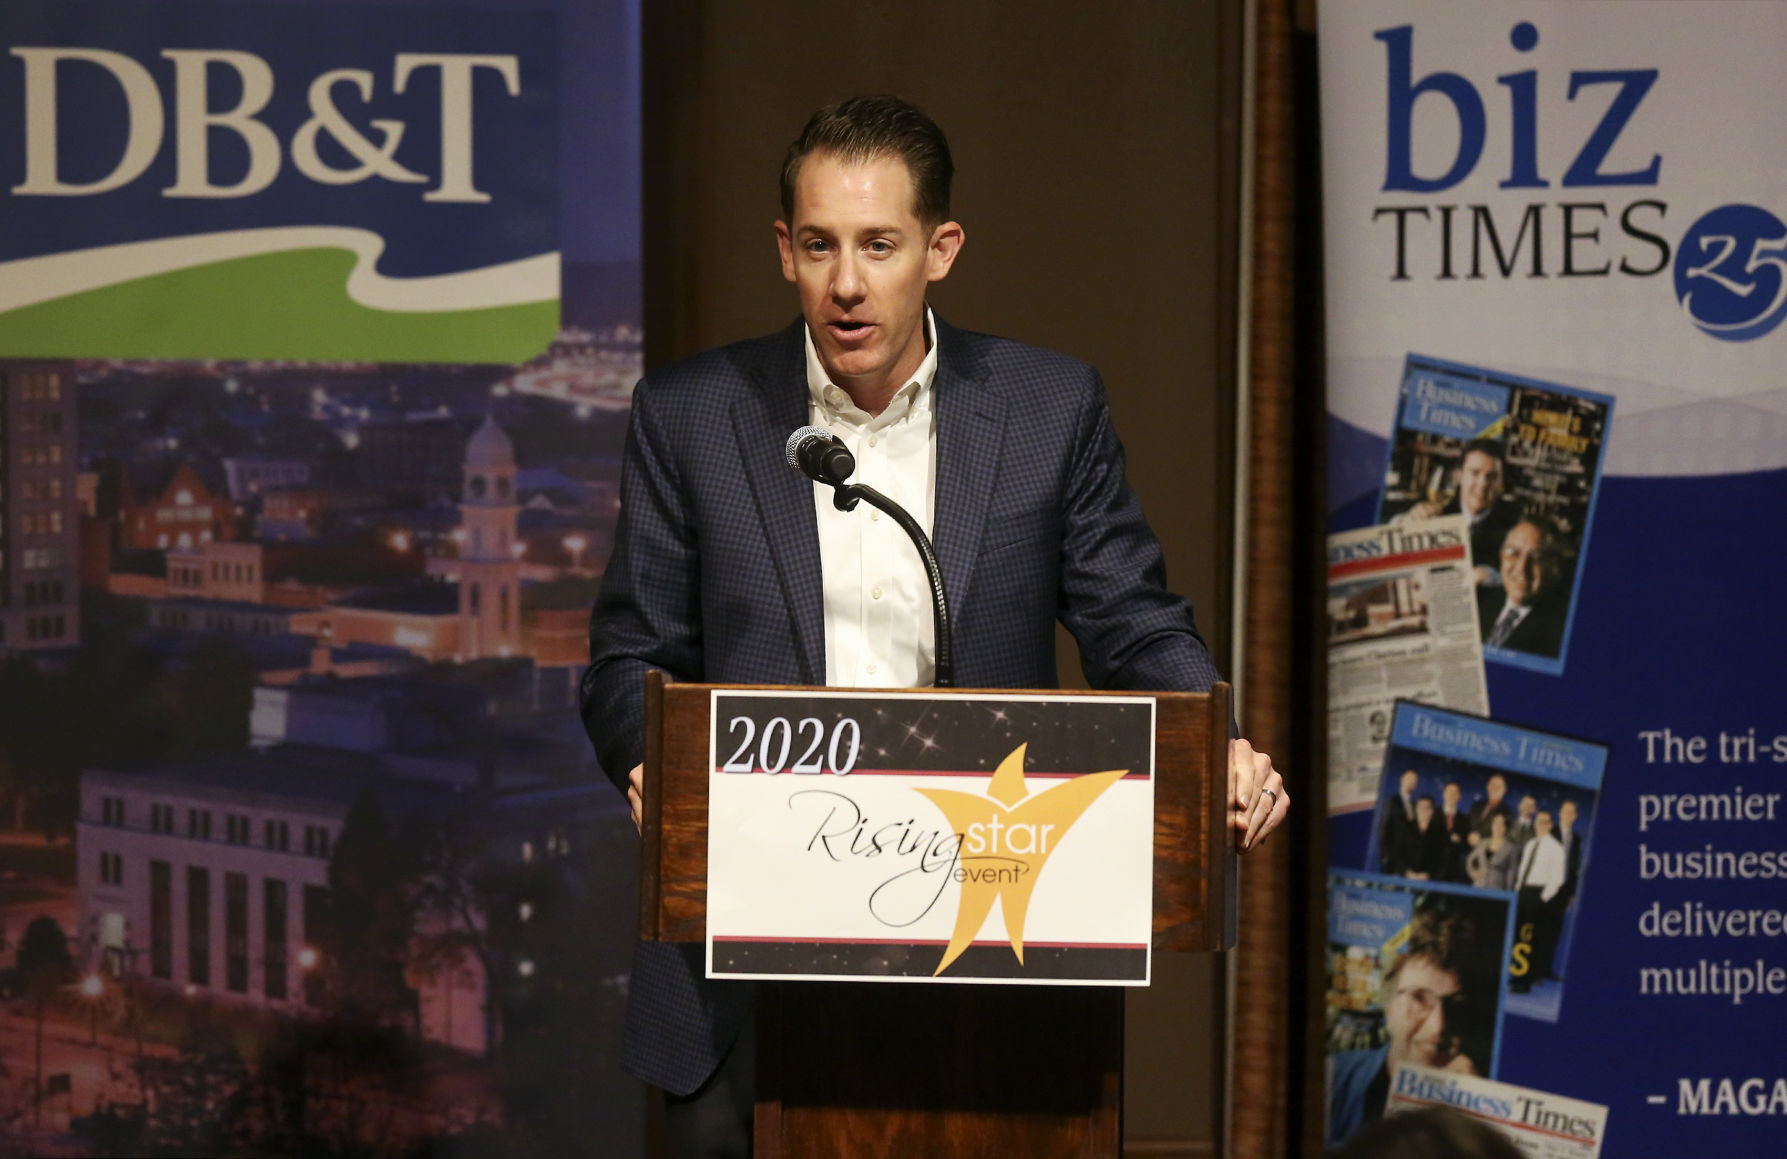 Tyson Leyendecker, with Dubuque Bank and Trust, speaks during the Rising Stars award ceremony at Diamond Jo Casino in Dubuque on Wednesday, Sept. 16, 2020. PHOTO CREDIT: NICKI KOHL